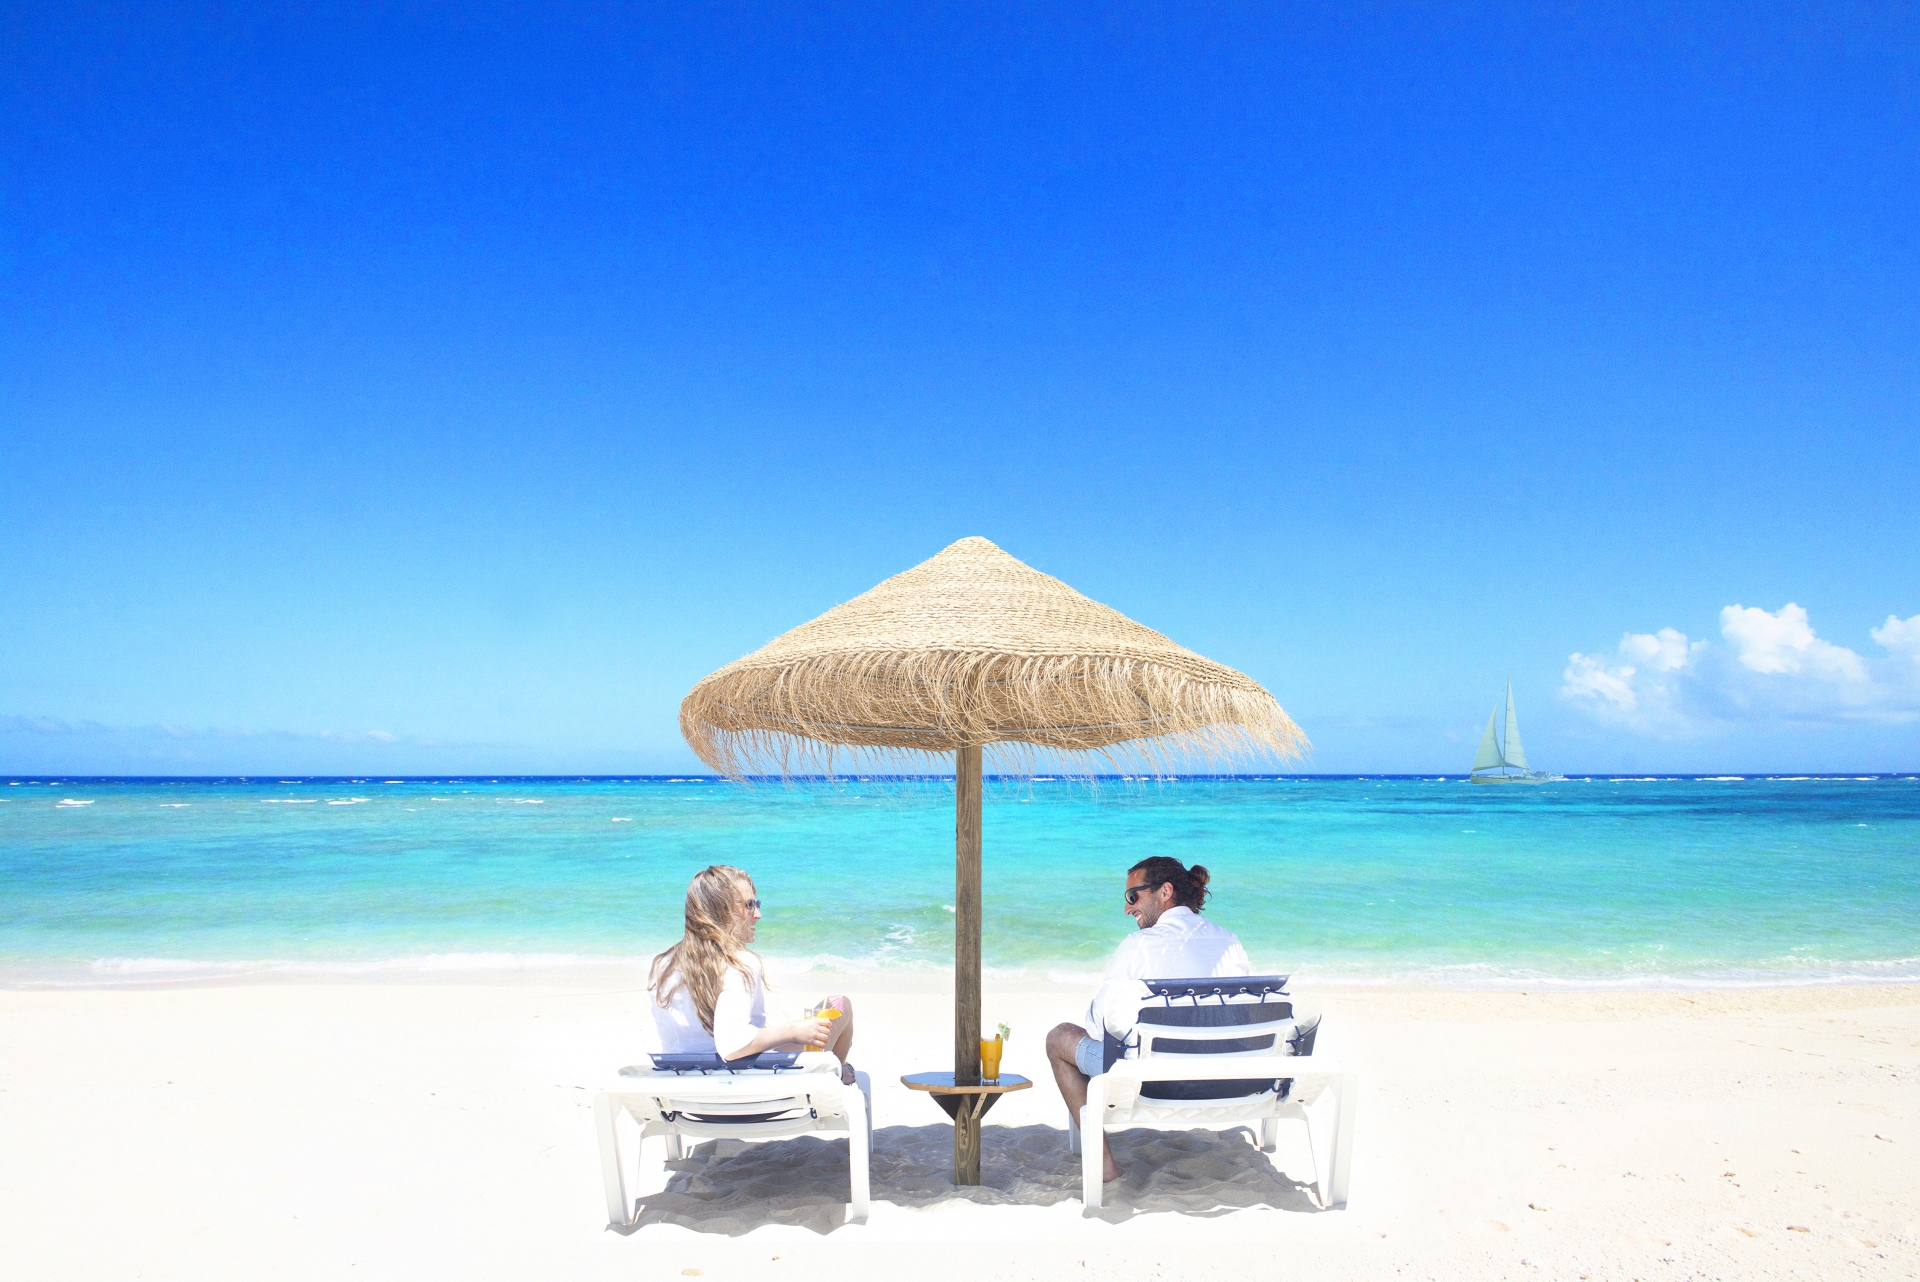 A couple sitting on beach chairs on the sand at the beach, under a straw sunshade